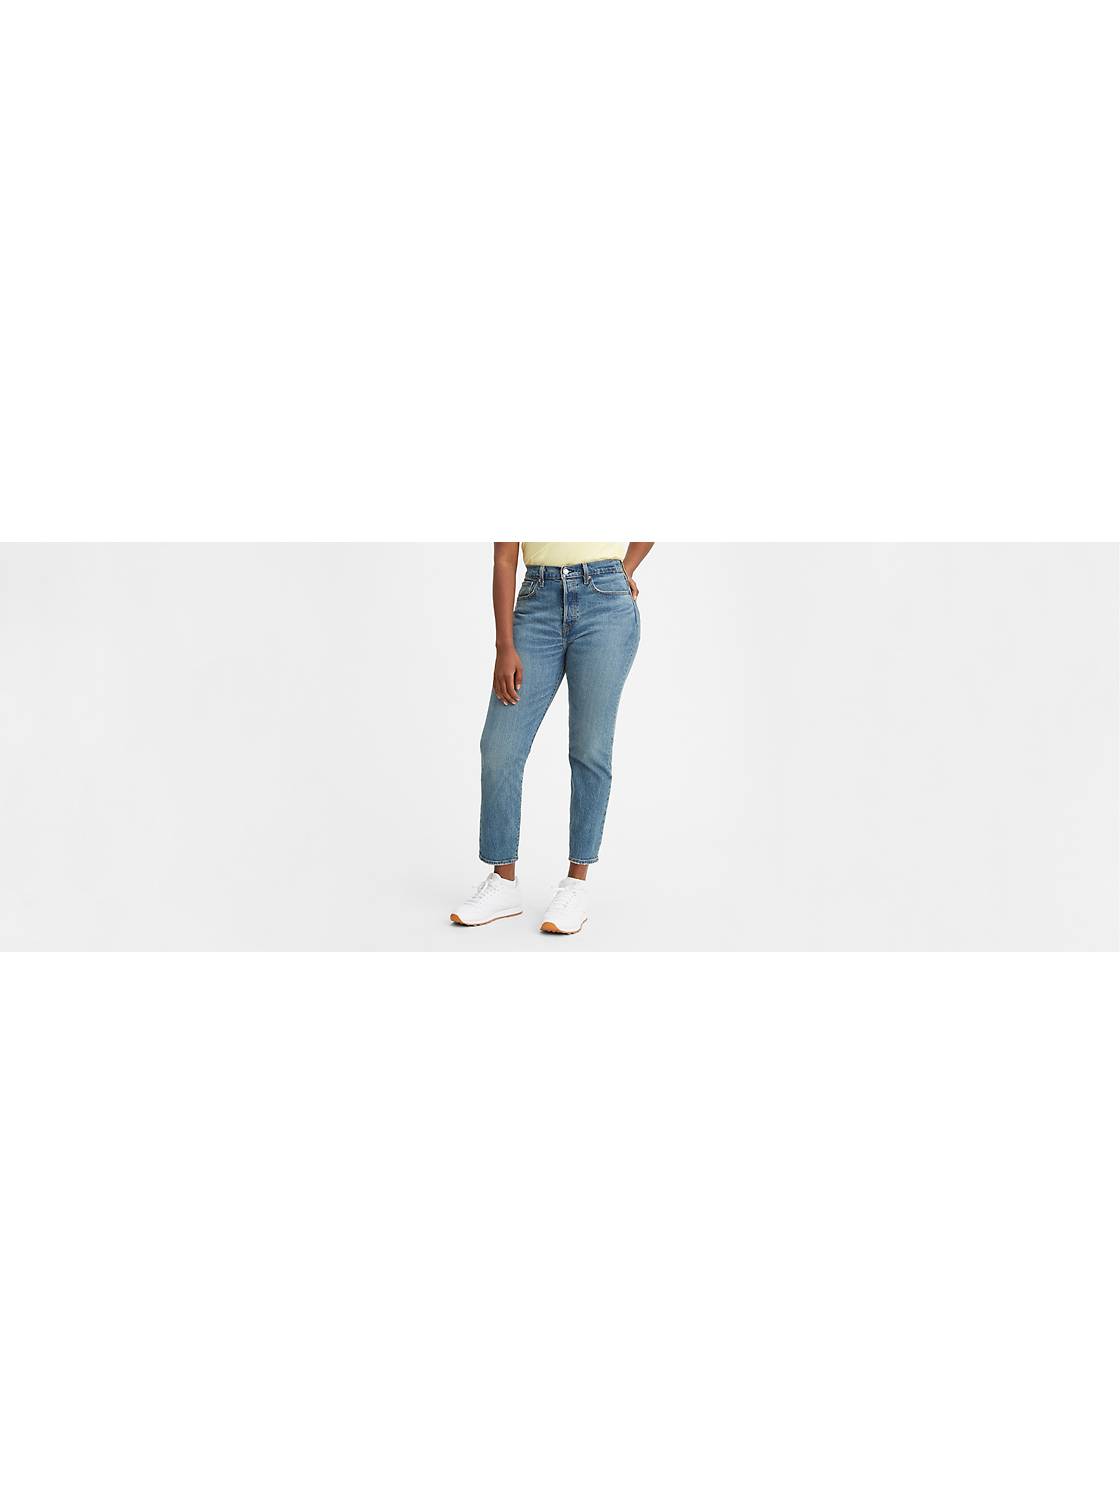 Wedgie Fit Ankle Women's Jeans 1